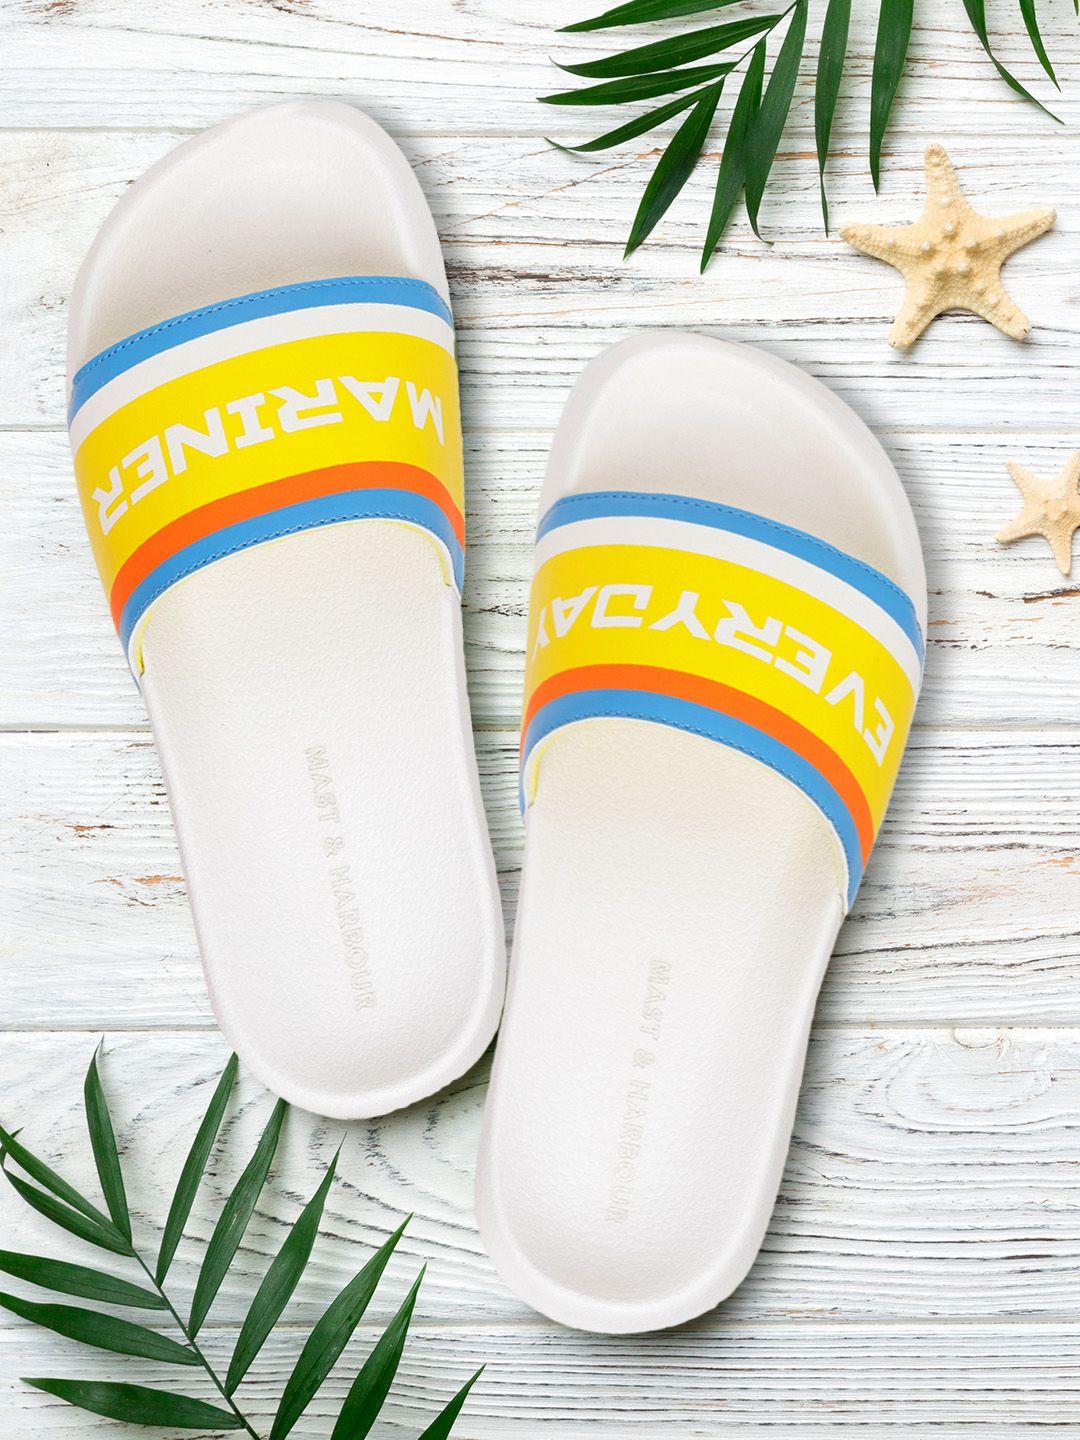 mast & harbour men yellow & white typography printed sliders with striped detail